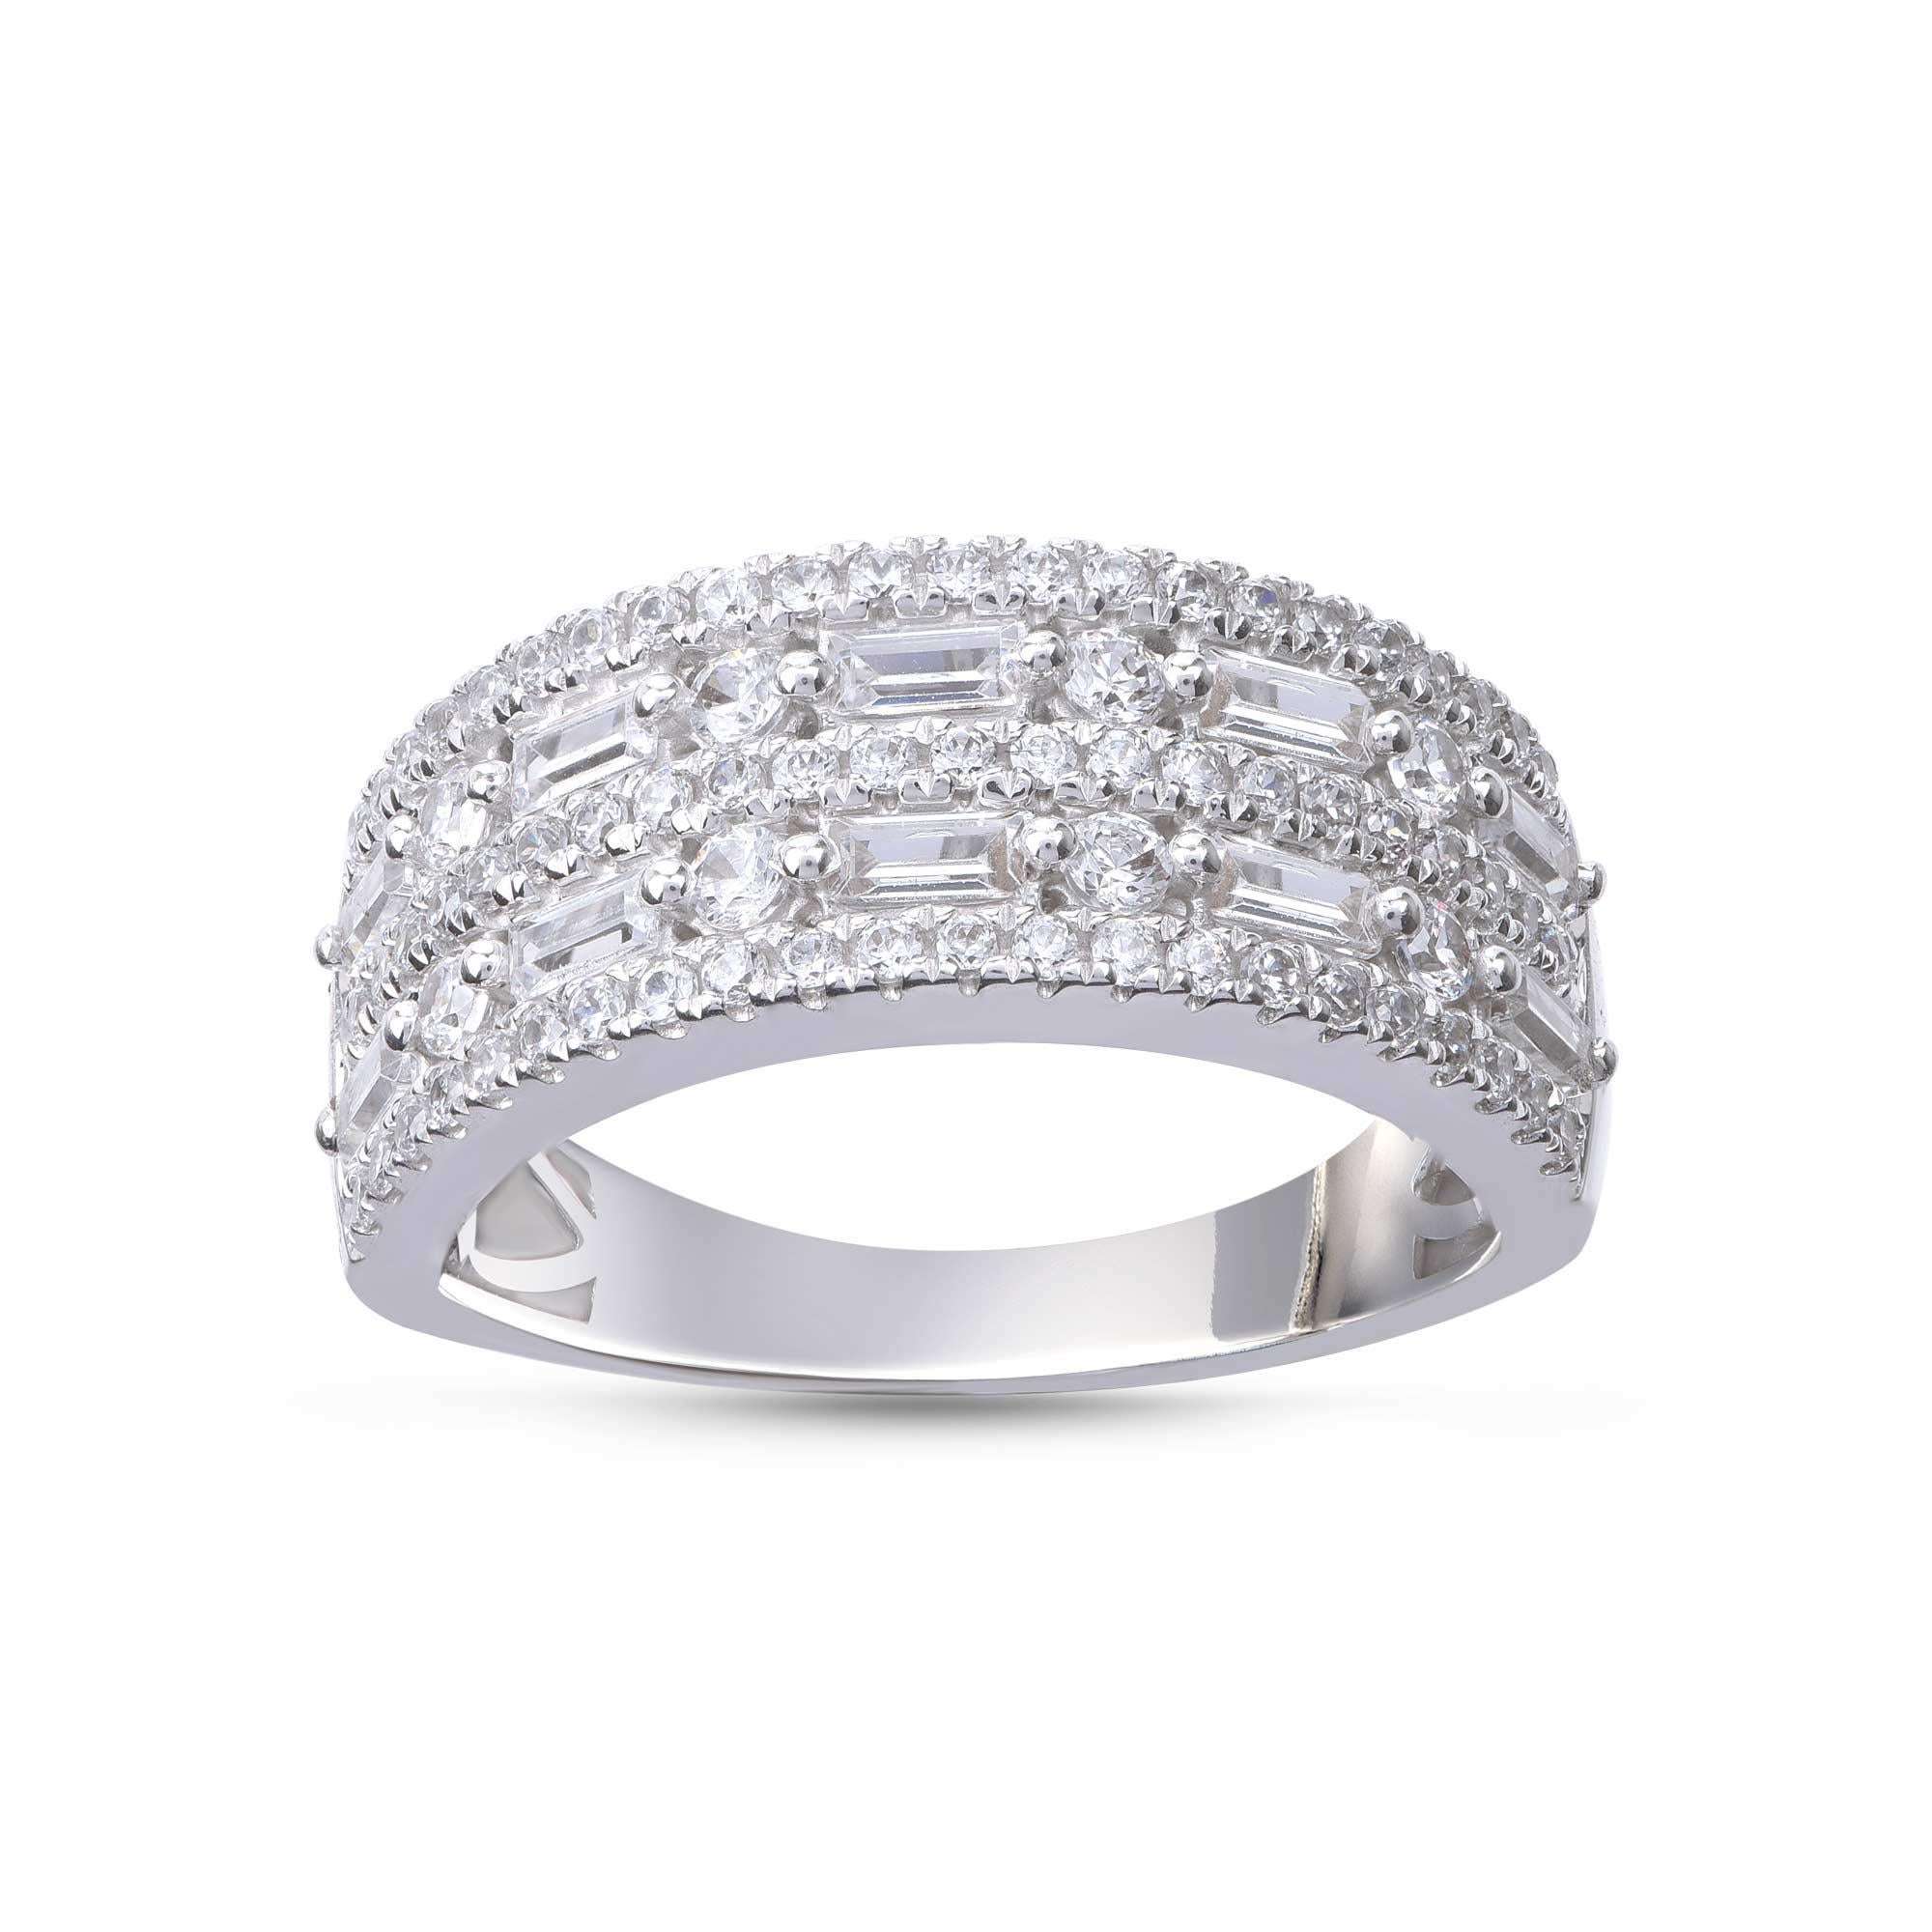 Made by our specialized artisans in 18-karat white gold and accentuated with 74 brilliant and 10 baguette diamonds in prong and micro-prong setting. The diamonds are graded H-I Color, I2 Clarity. 

Metal color and ring size can be customized on